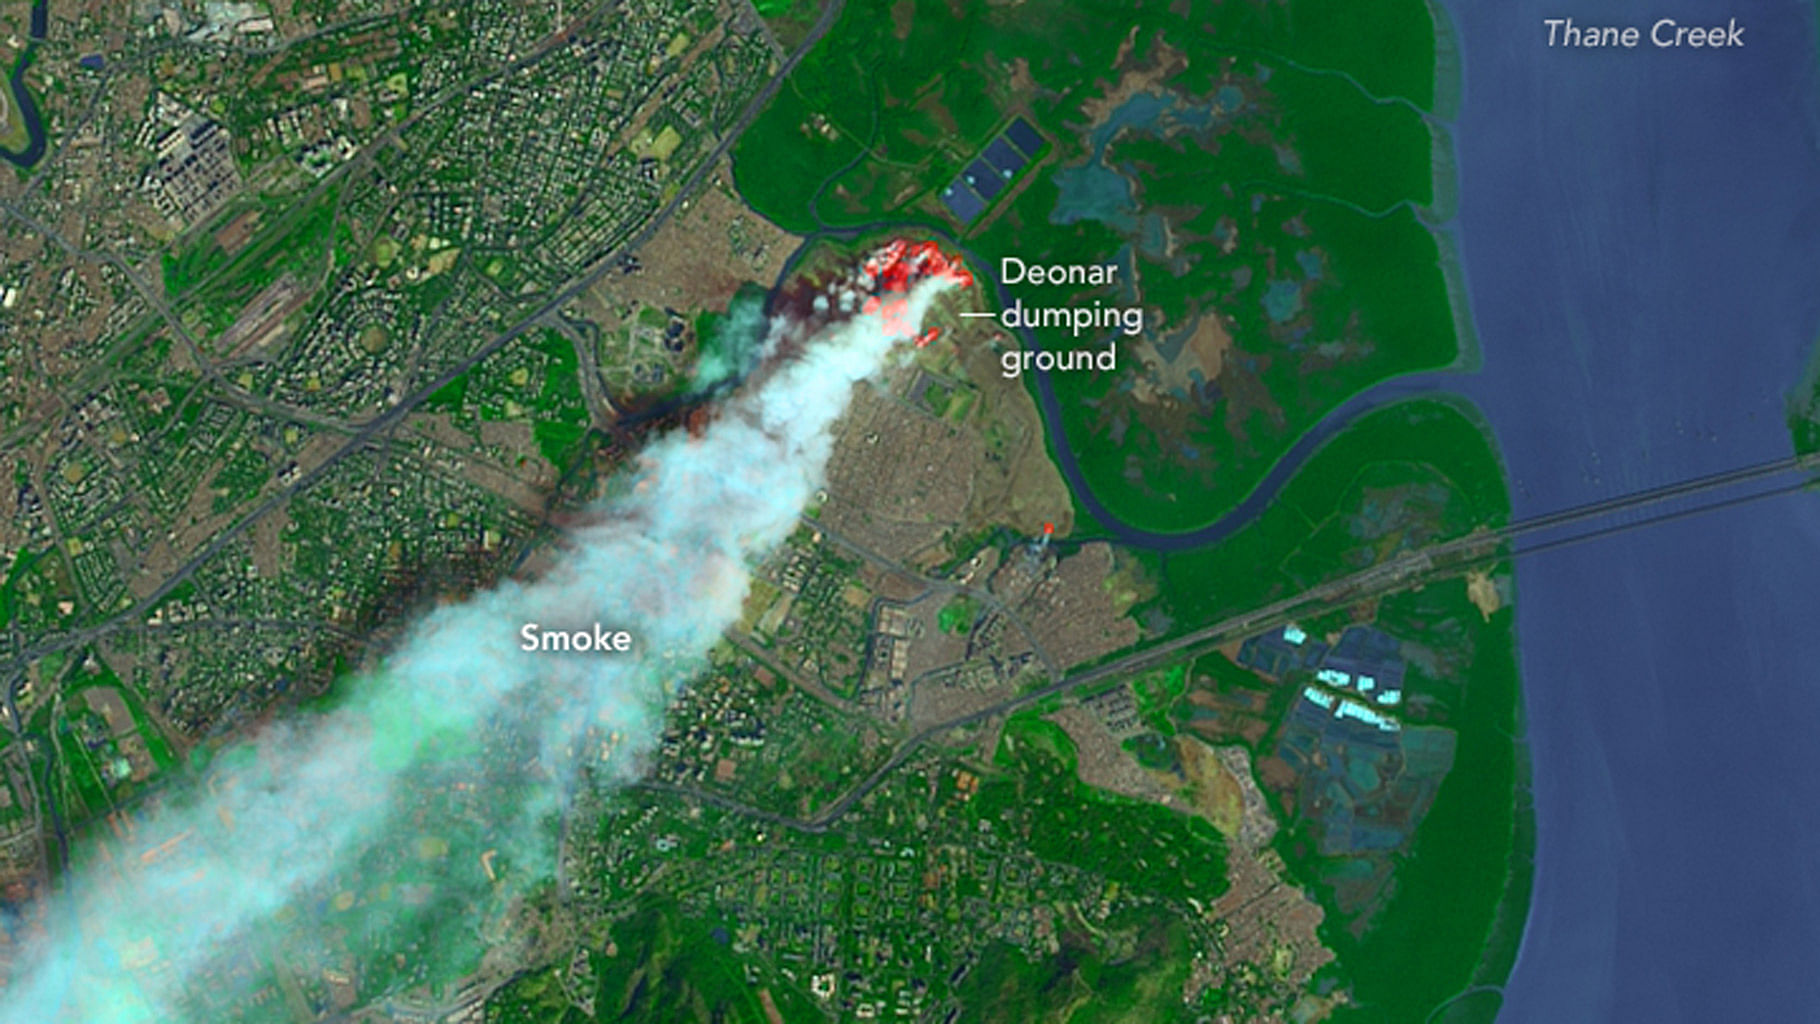 

Sensors on the Terra, Aqua and Suomi NPP satellites began detecting smoke and fire from the landfill on January 27. (Photo: Twitter/<a href="https://twitter.com/NASAEarth">@NASAEarth</a>)